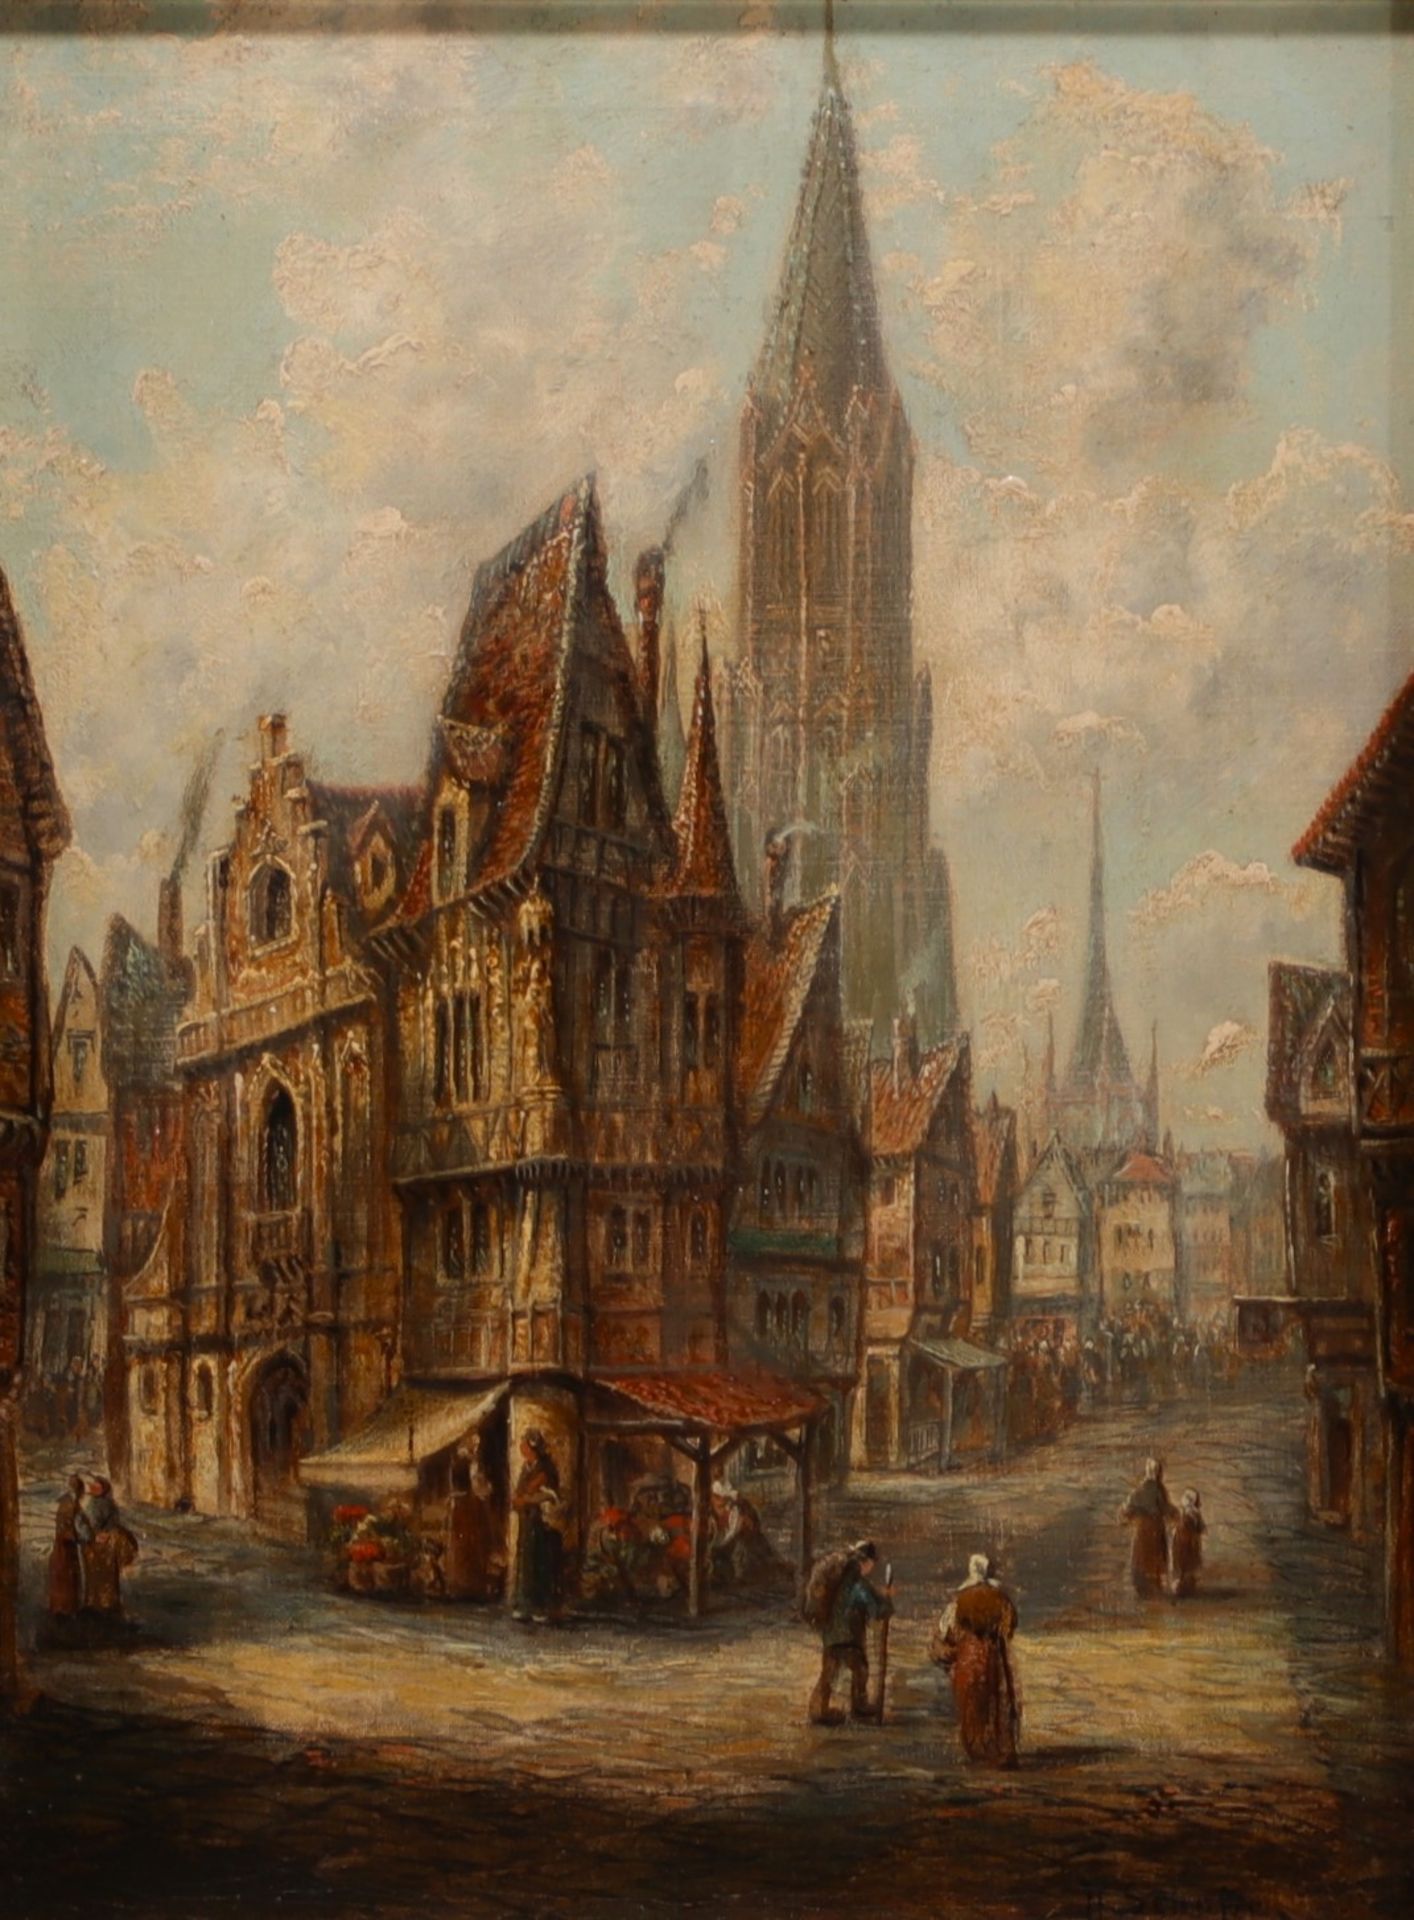 Henry Thomas SCHAEFER (1815-1873) "View of a French or German town" Oil on canvas.